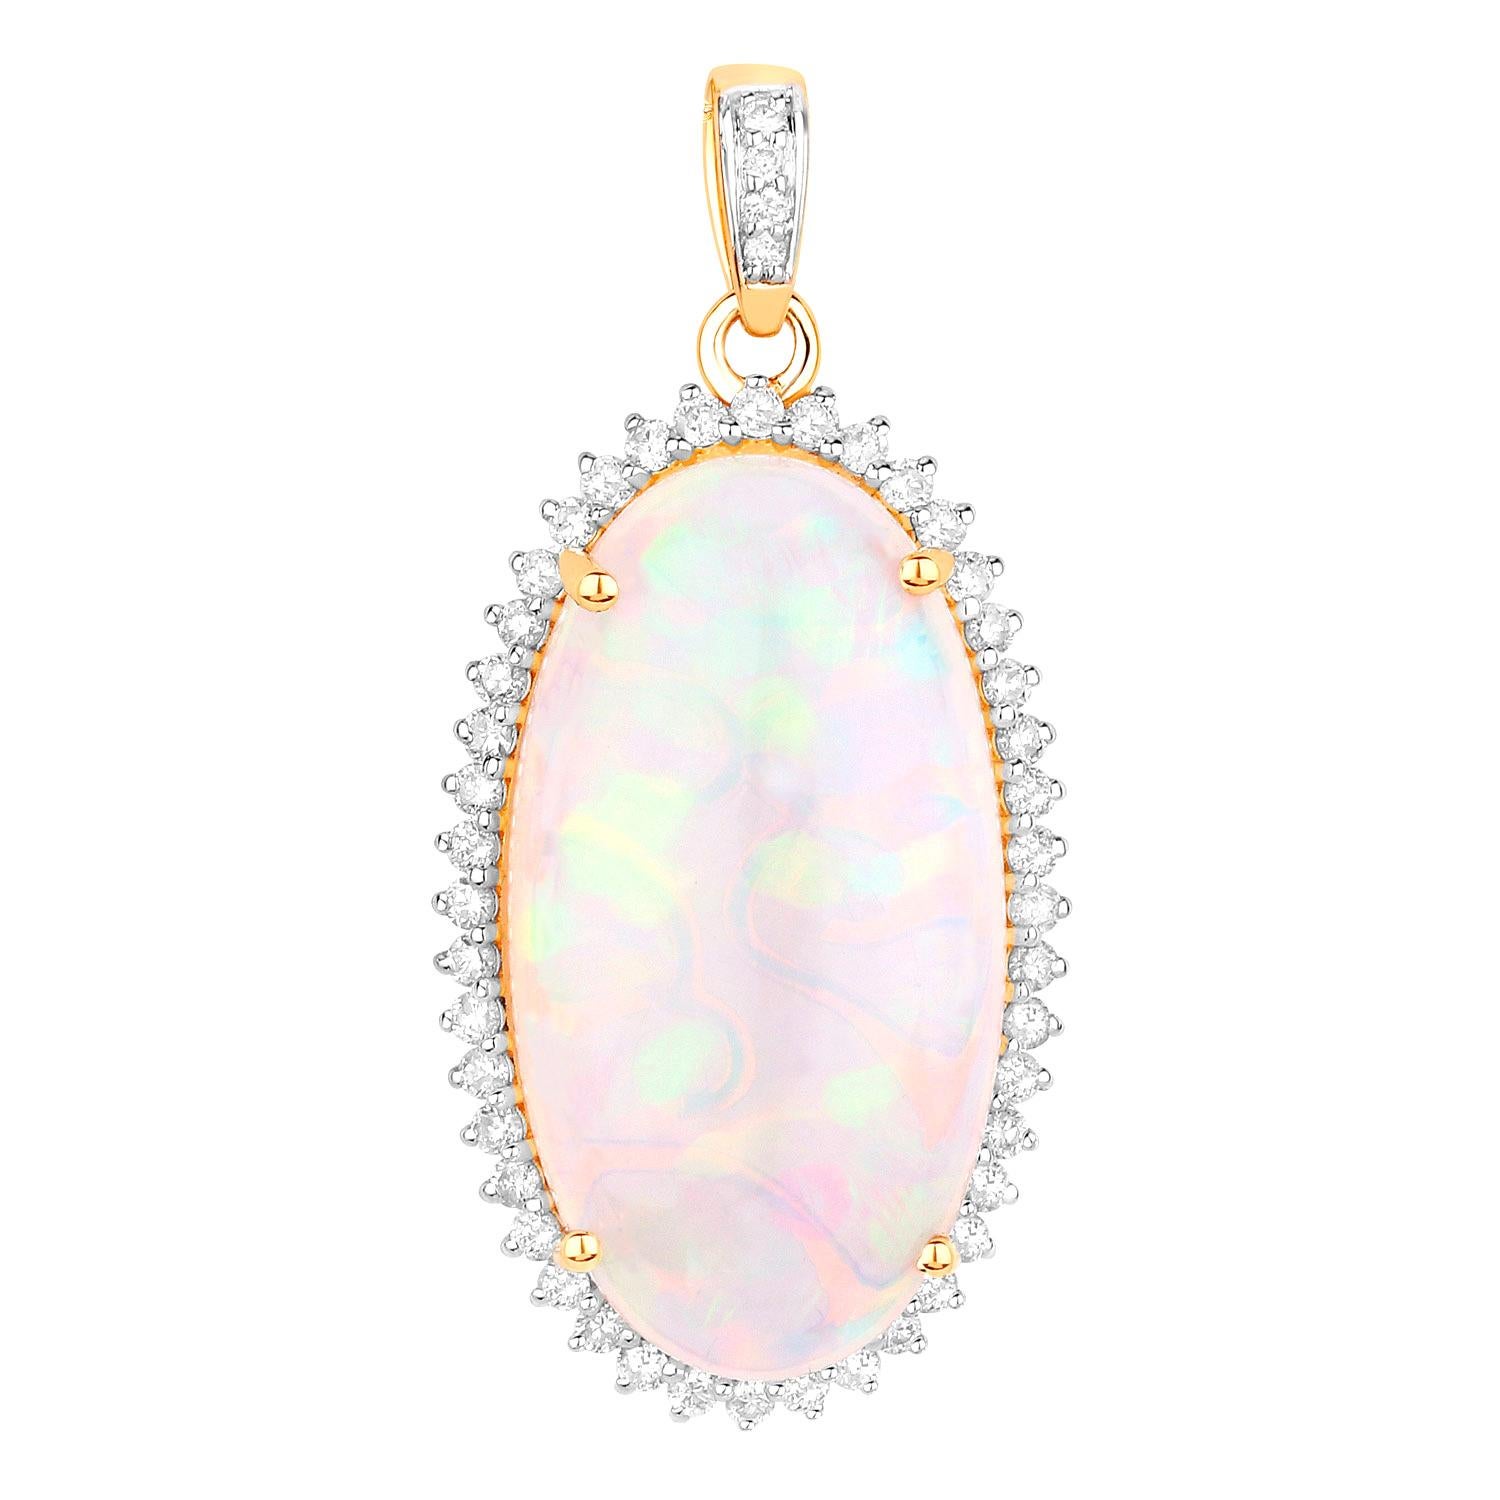 Cabochon Natural Opal Pendant Necklace Diamond Setting  11.68 Carats 14K Yellow Gold For Sale